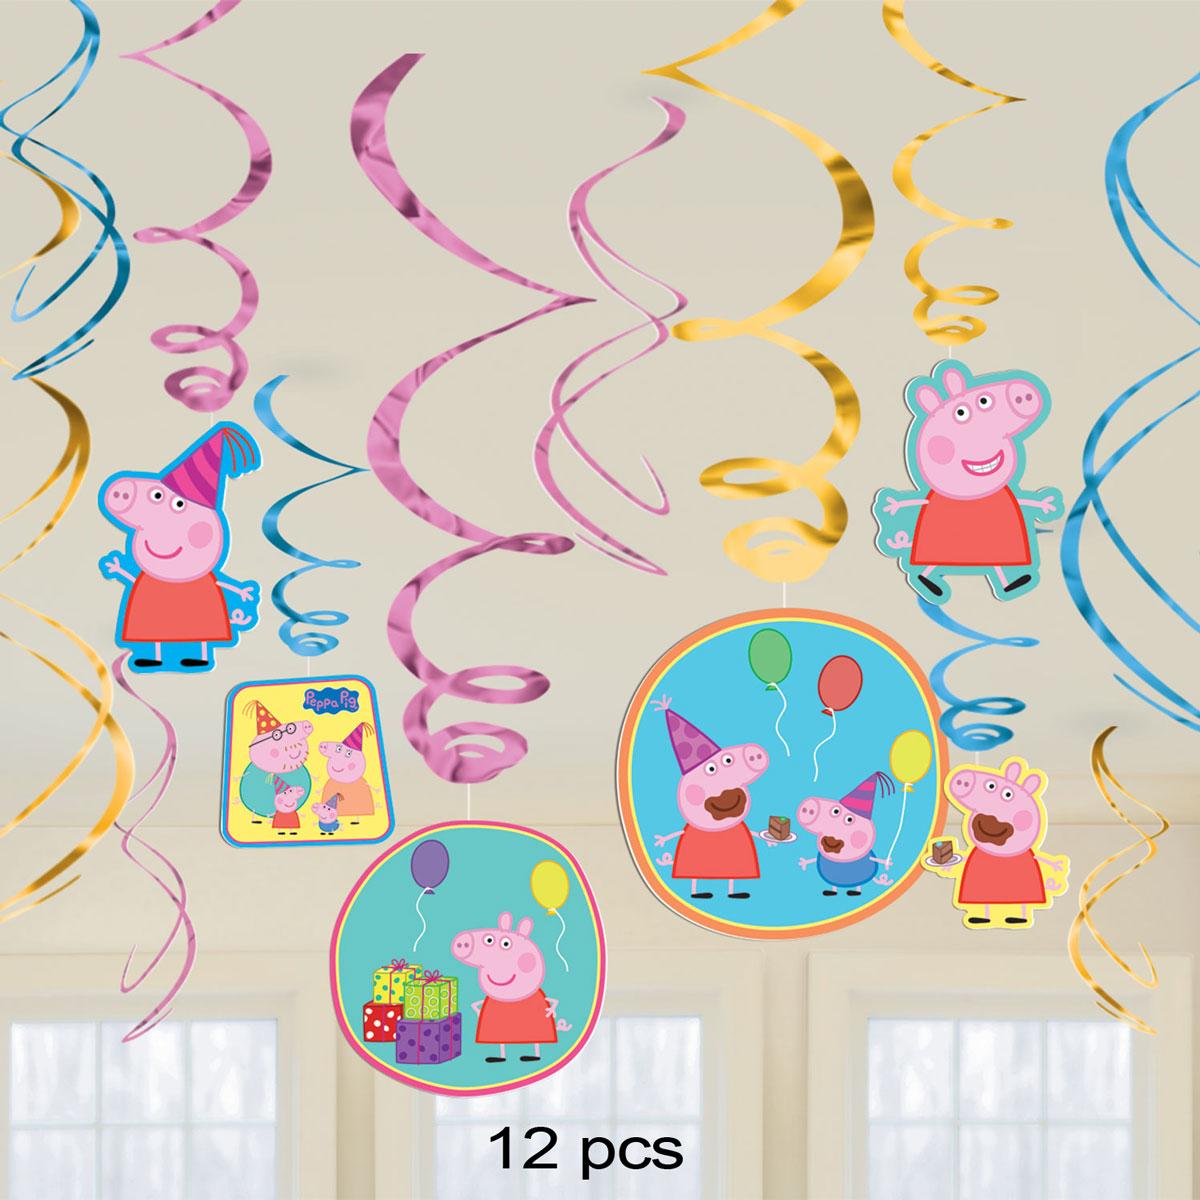 Peppa Pig Hanging Swirl Decorations 12pcs in metallic foil with 6 cutouts by Amscan 671499 available here at Karnival Costumes online party shop